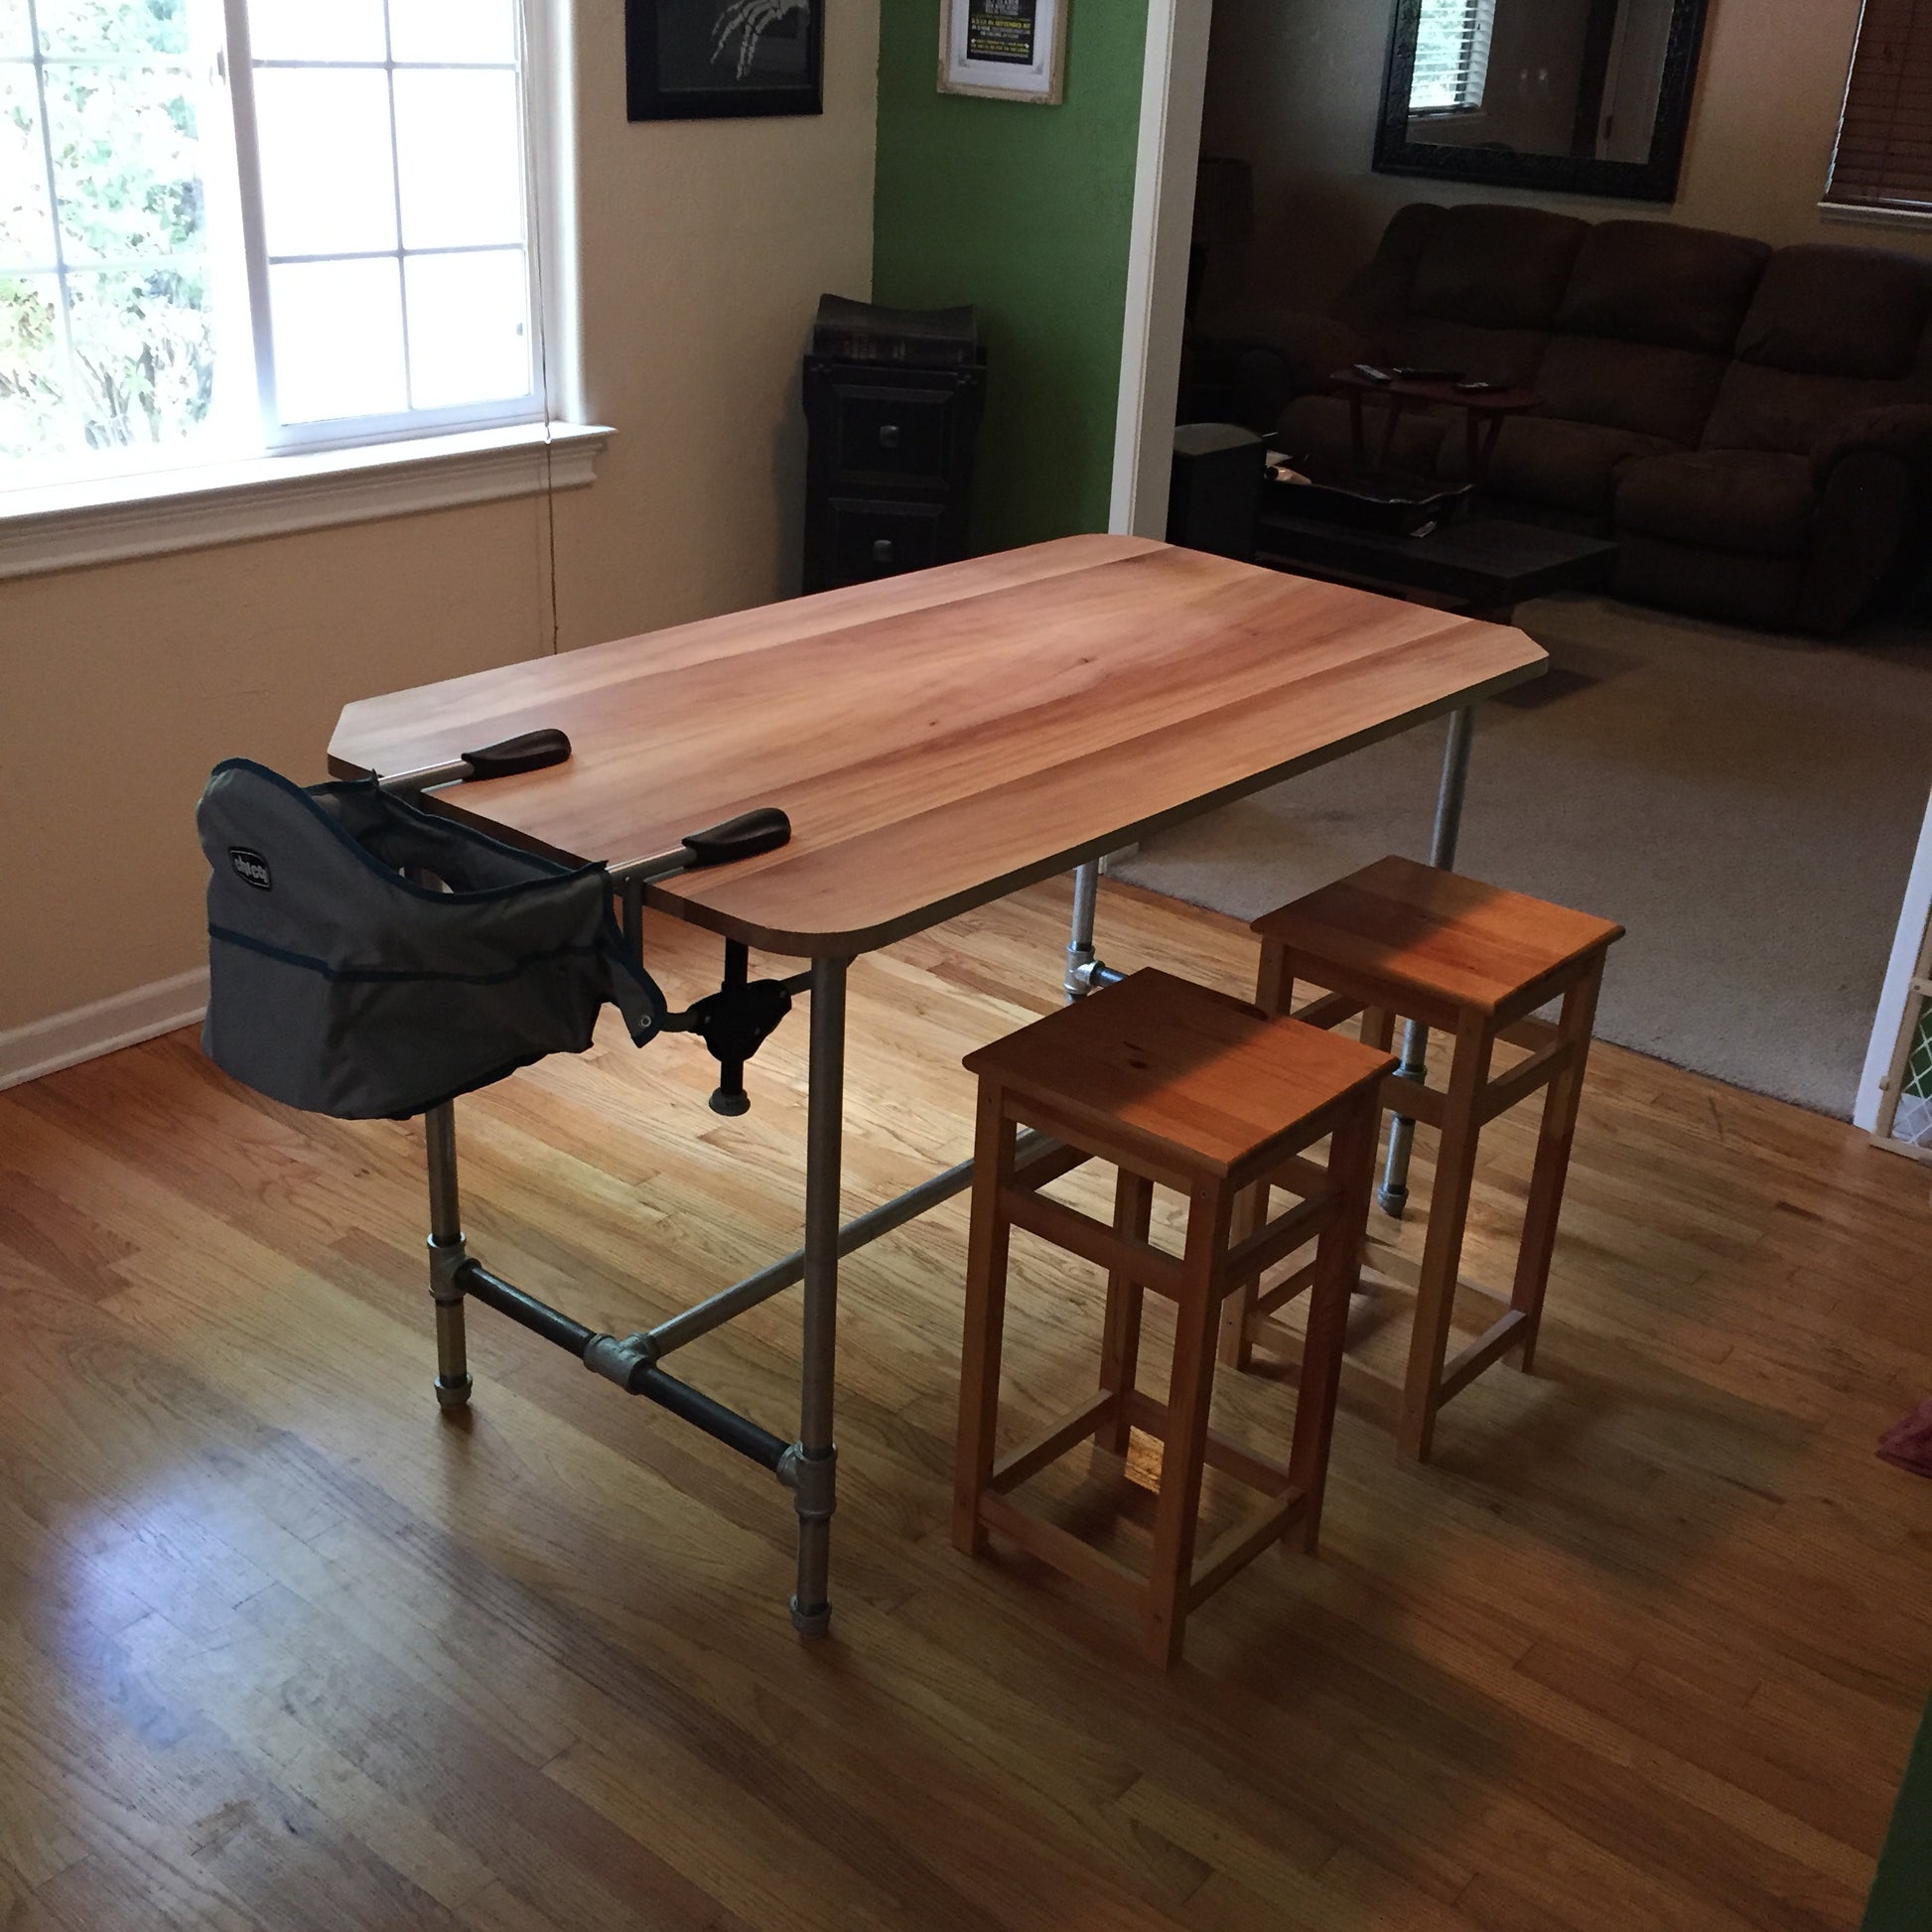 Redwood dining table